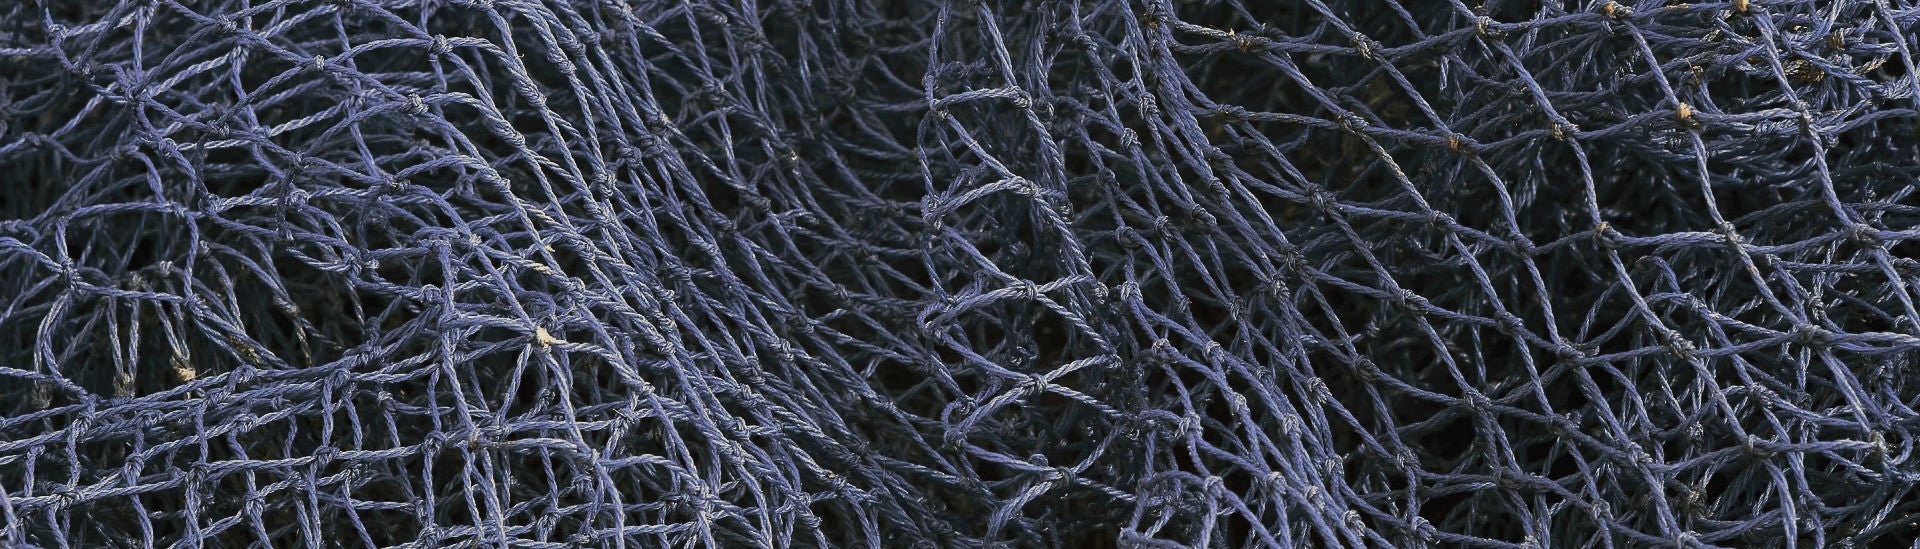 Close up of dark blue fishing net in a pile